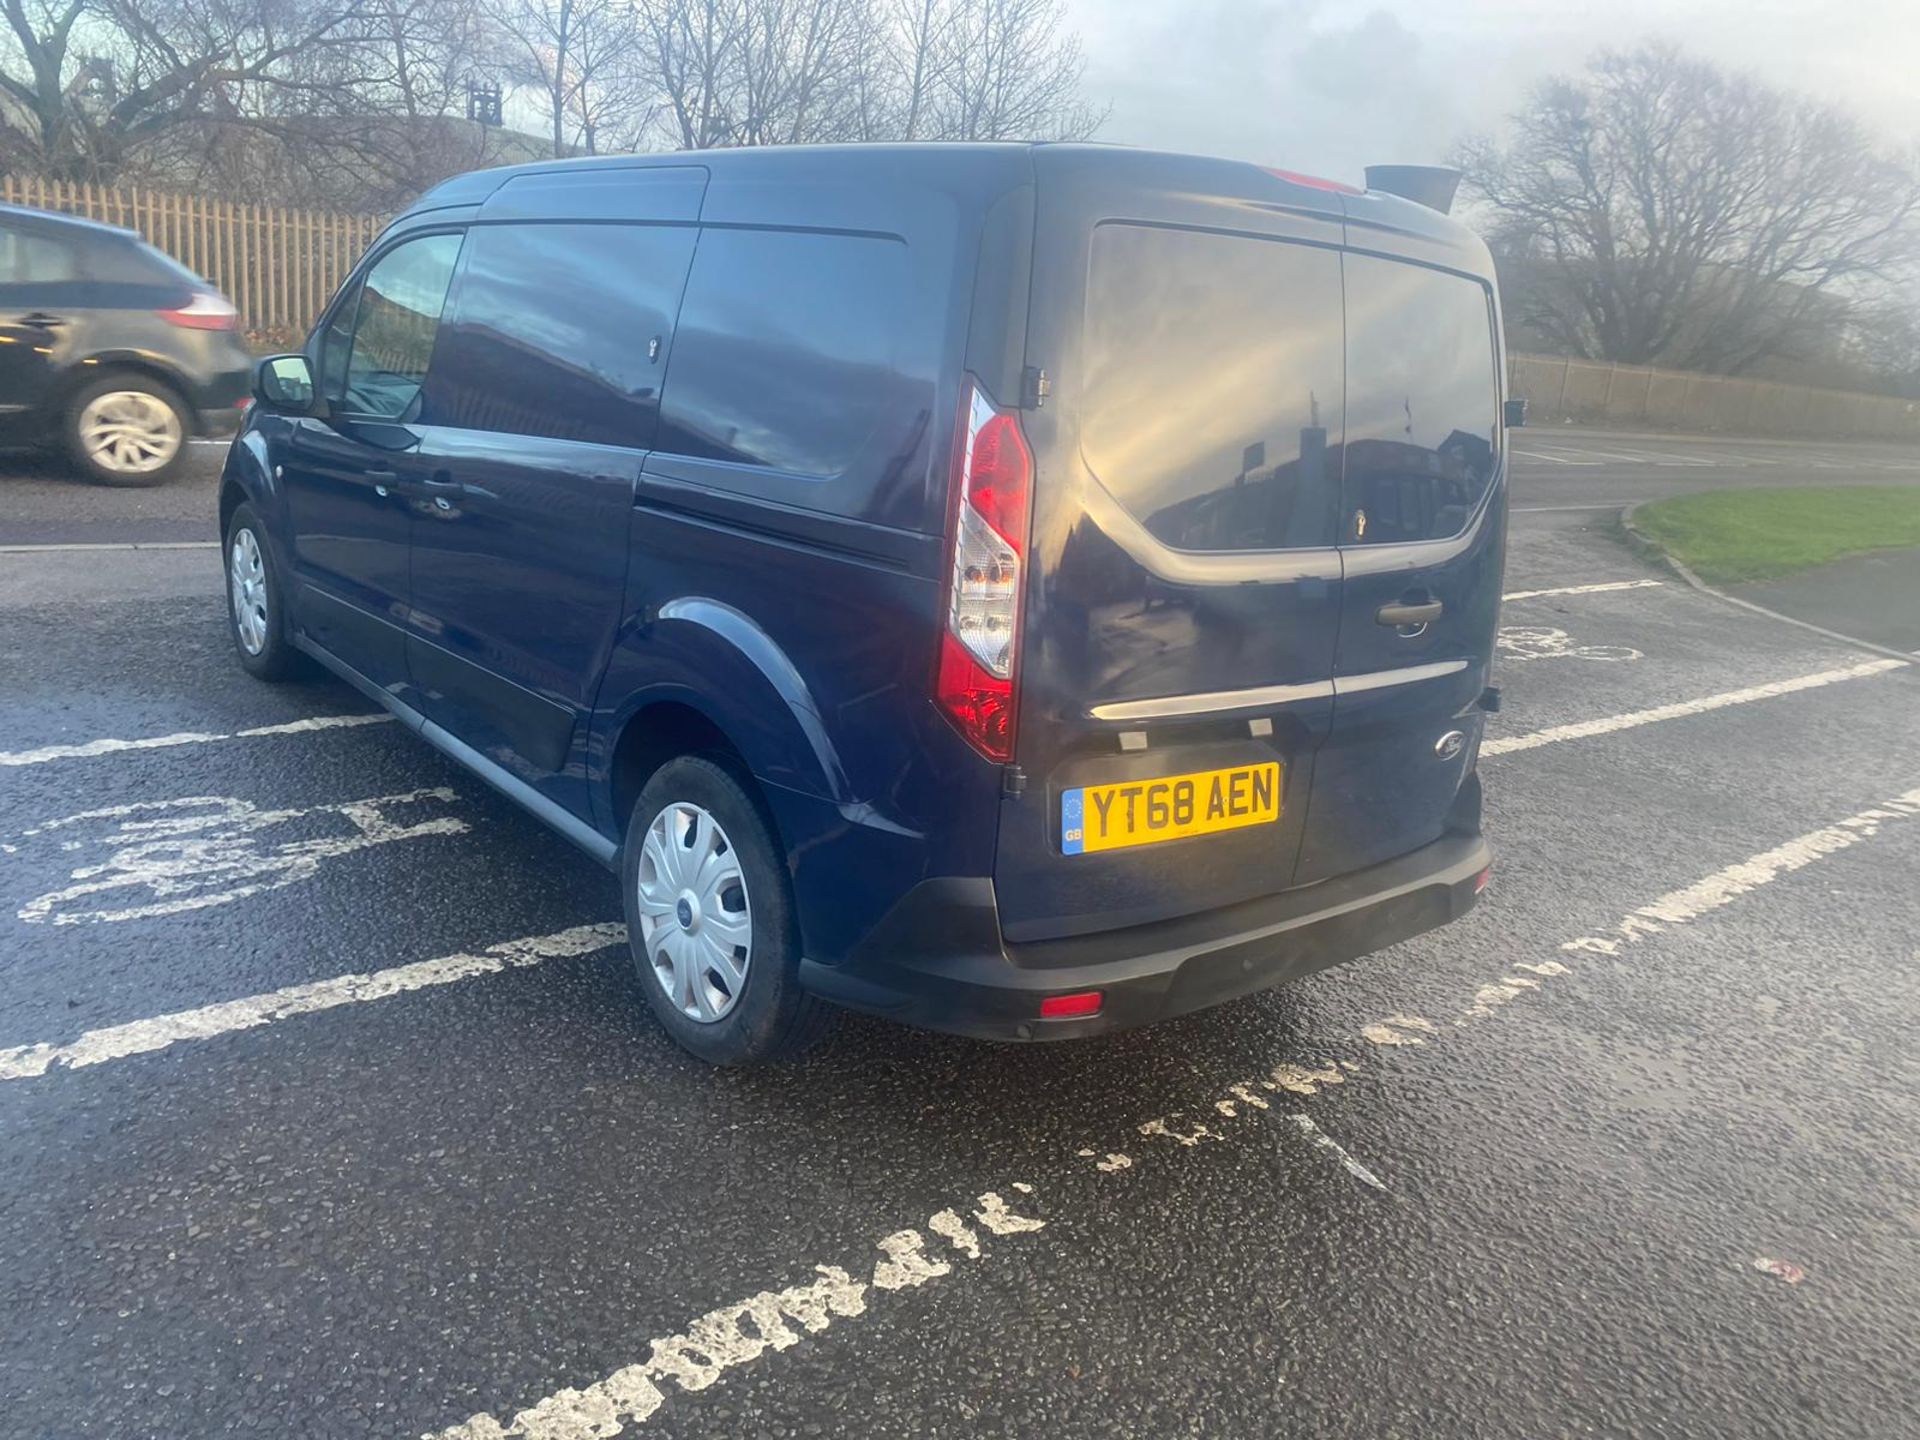 2018 68 FORD TRANSIT CONNECT TREND LWB PANEL VAN - 3 SEATS - NEWER SHAPE - AIR CON. - Image 4 of 9